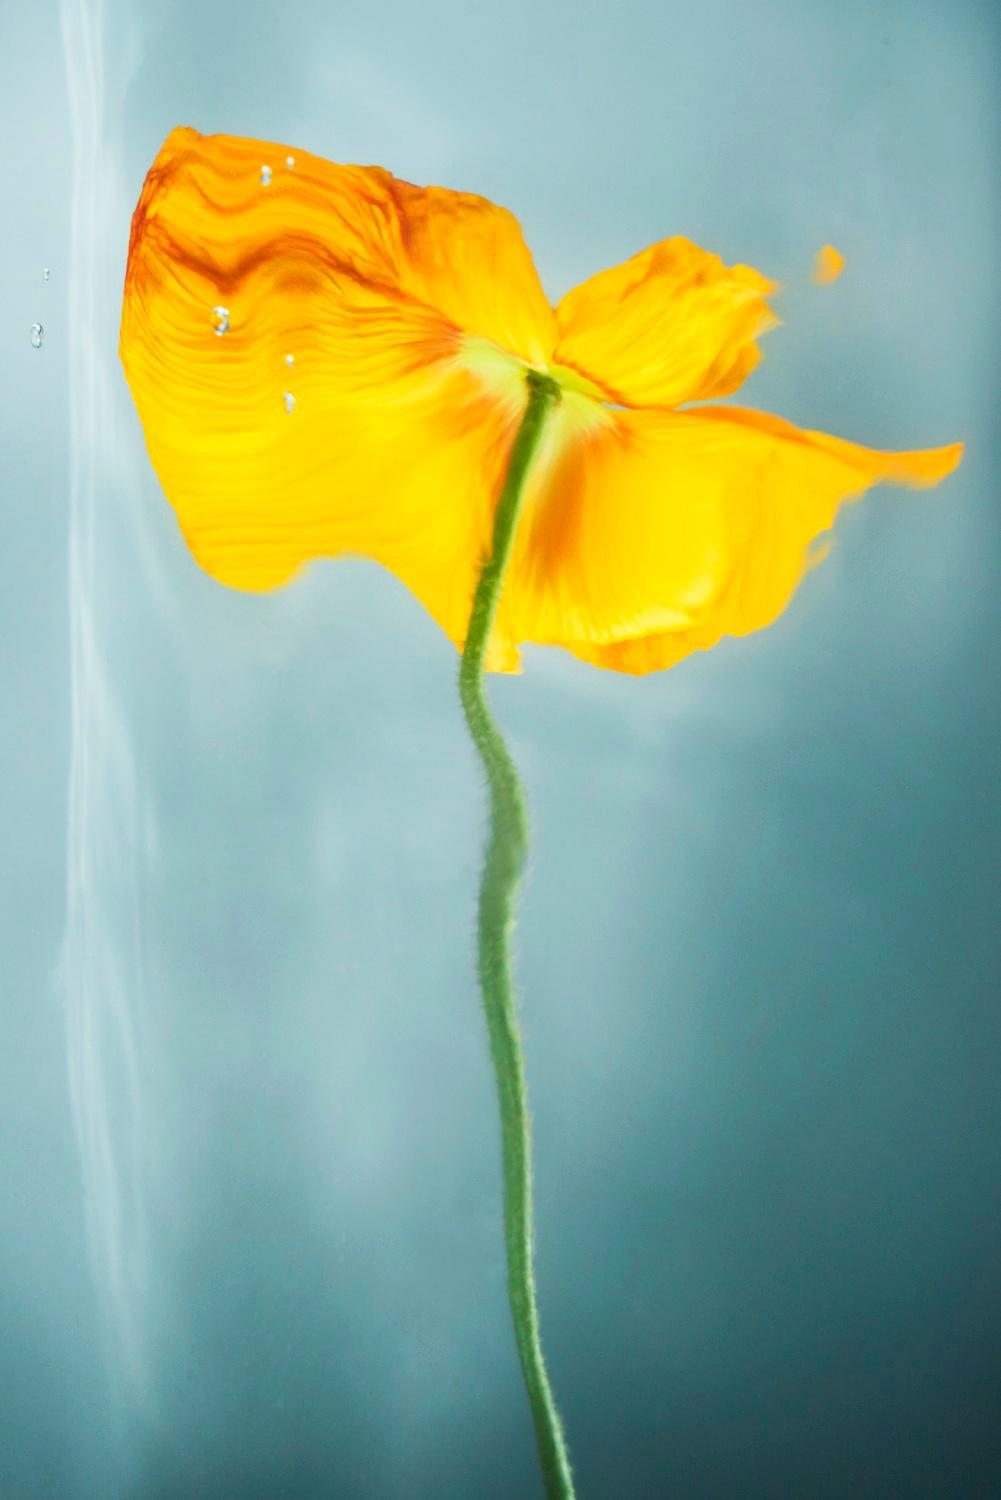 Sophie Delaporte Color Photograph - Flowers#19, flower, yellow, freshness, water